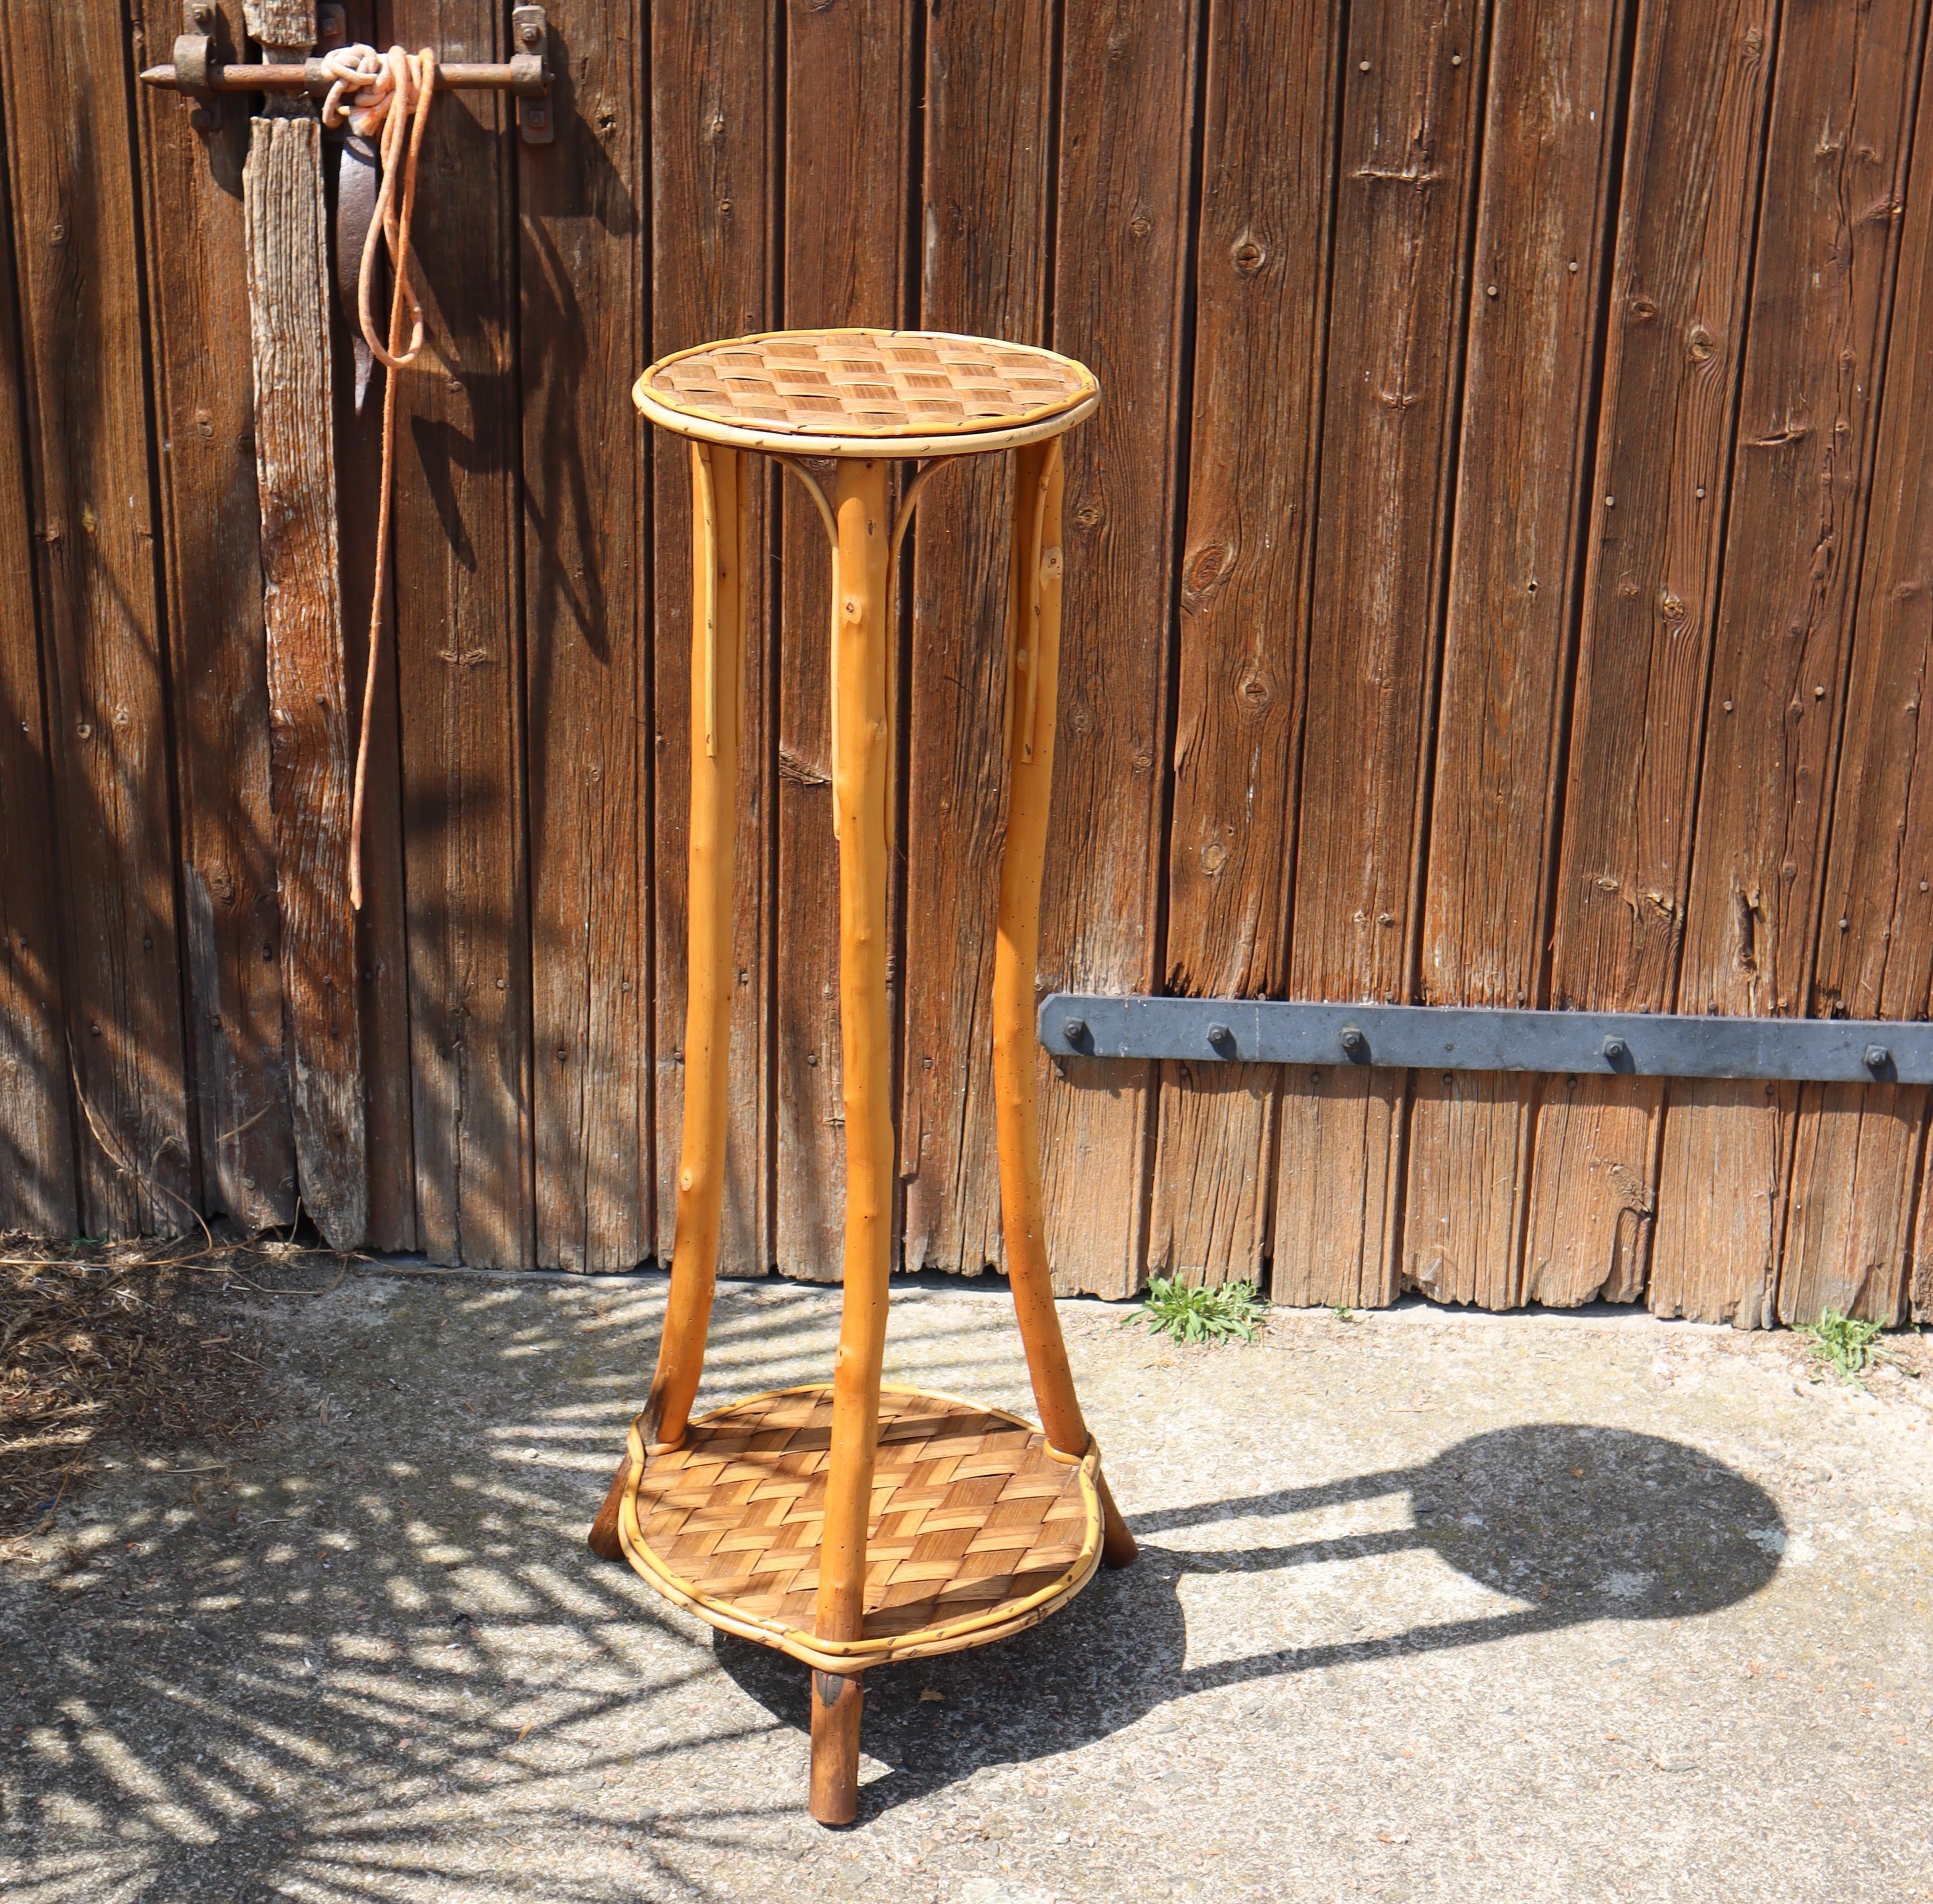 French Vintage Mid-Century Bamboo Chestnut Console - Side Table - Plant Stand from the 60s

High elegant Bamboo Console with Chestnut Wickerwork- and wooden Legs - good workmanship

Versatile and beautiful Object for your Home

nice vintage